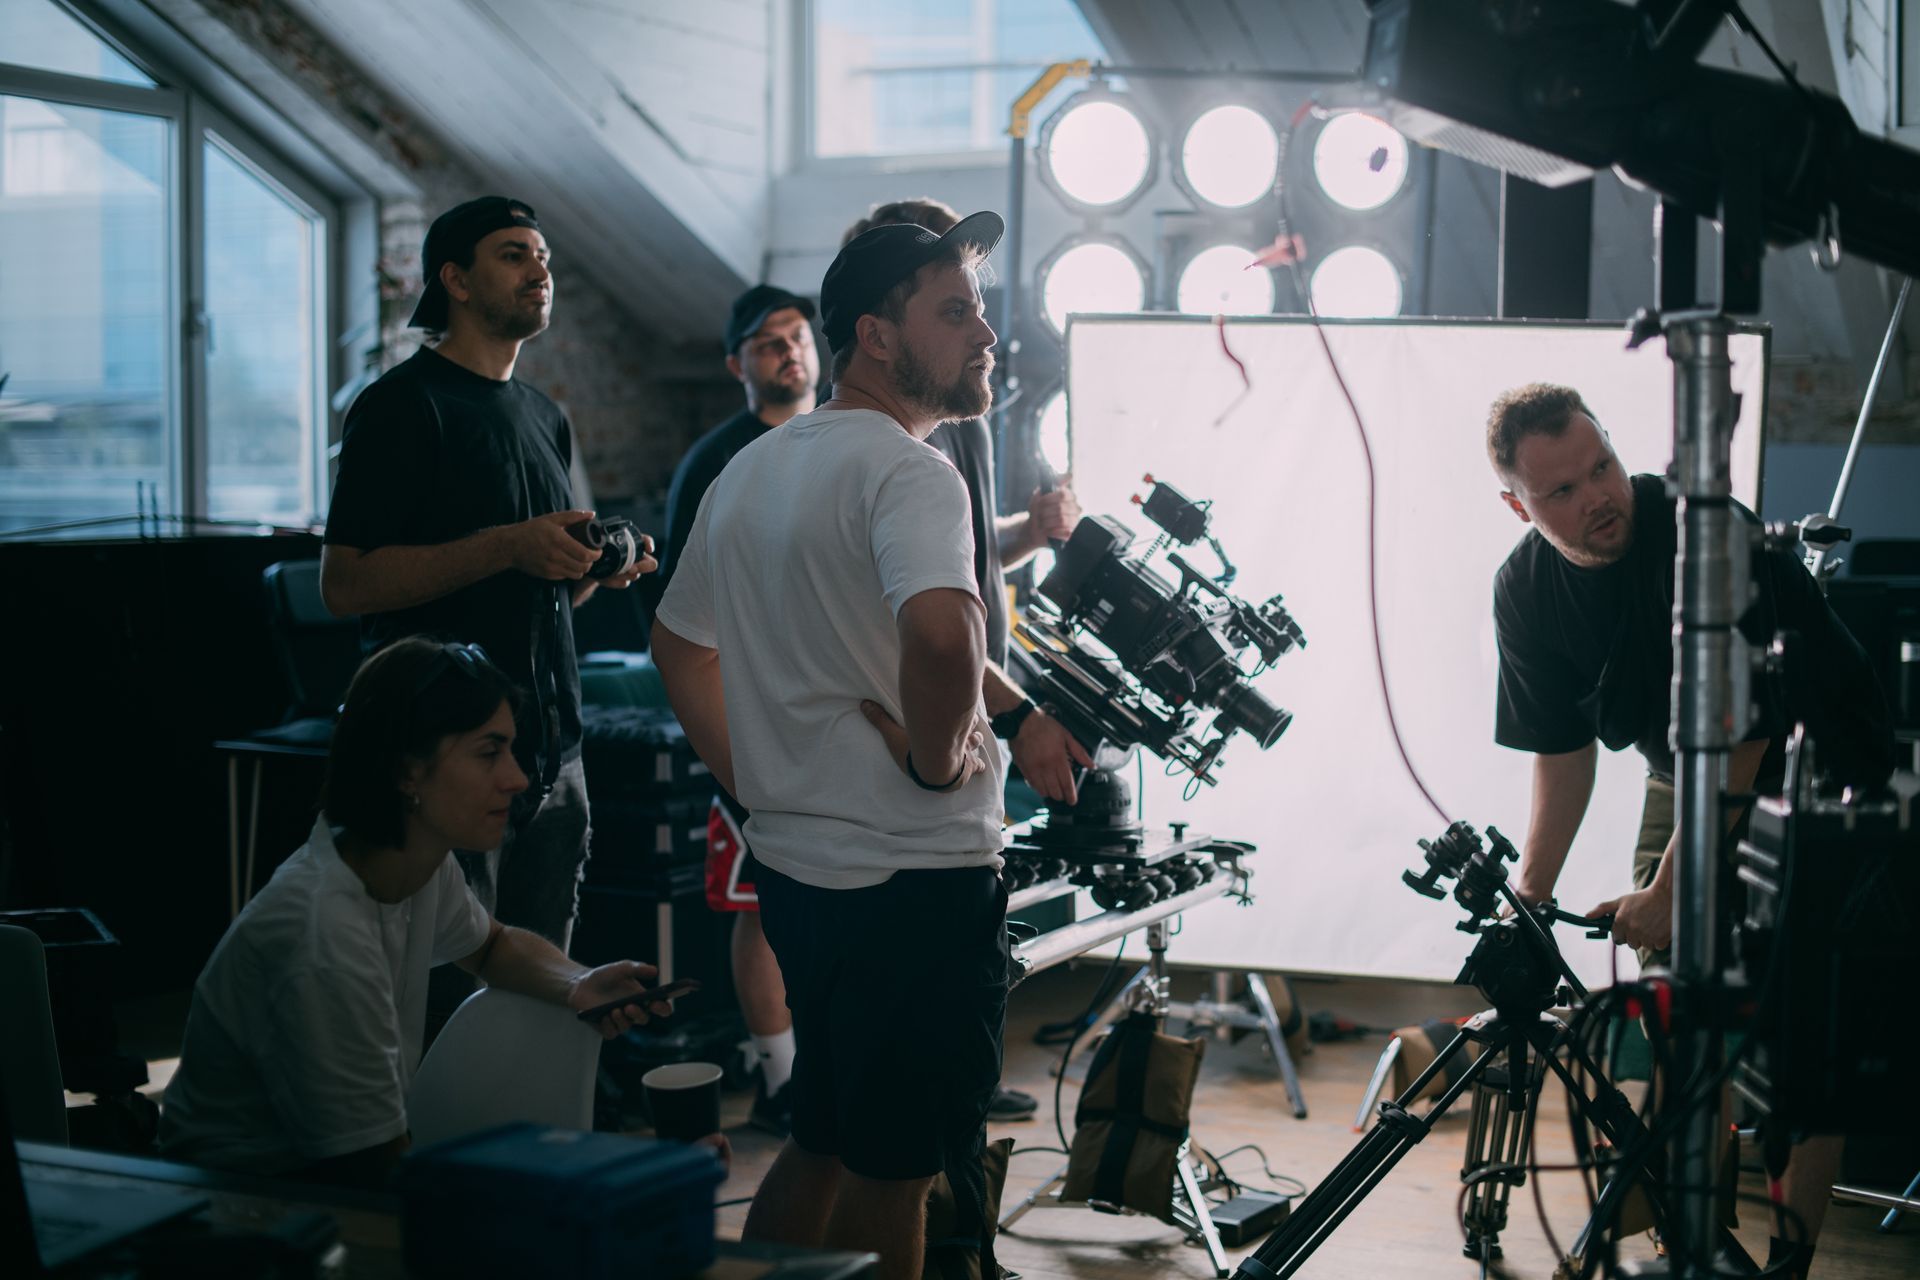 a group of directors and production assistants wait to begin shooting while discussing Film vs Video